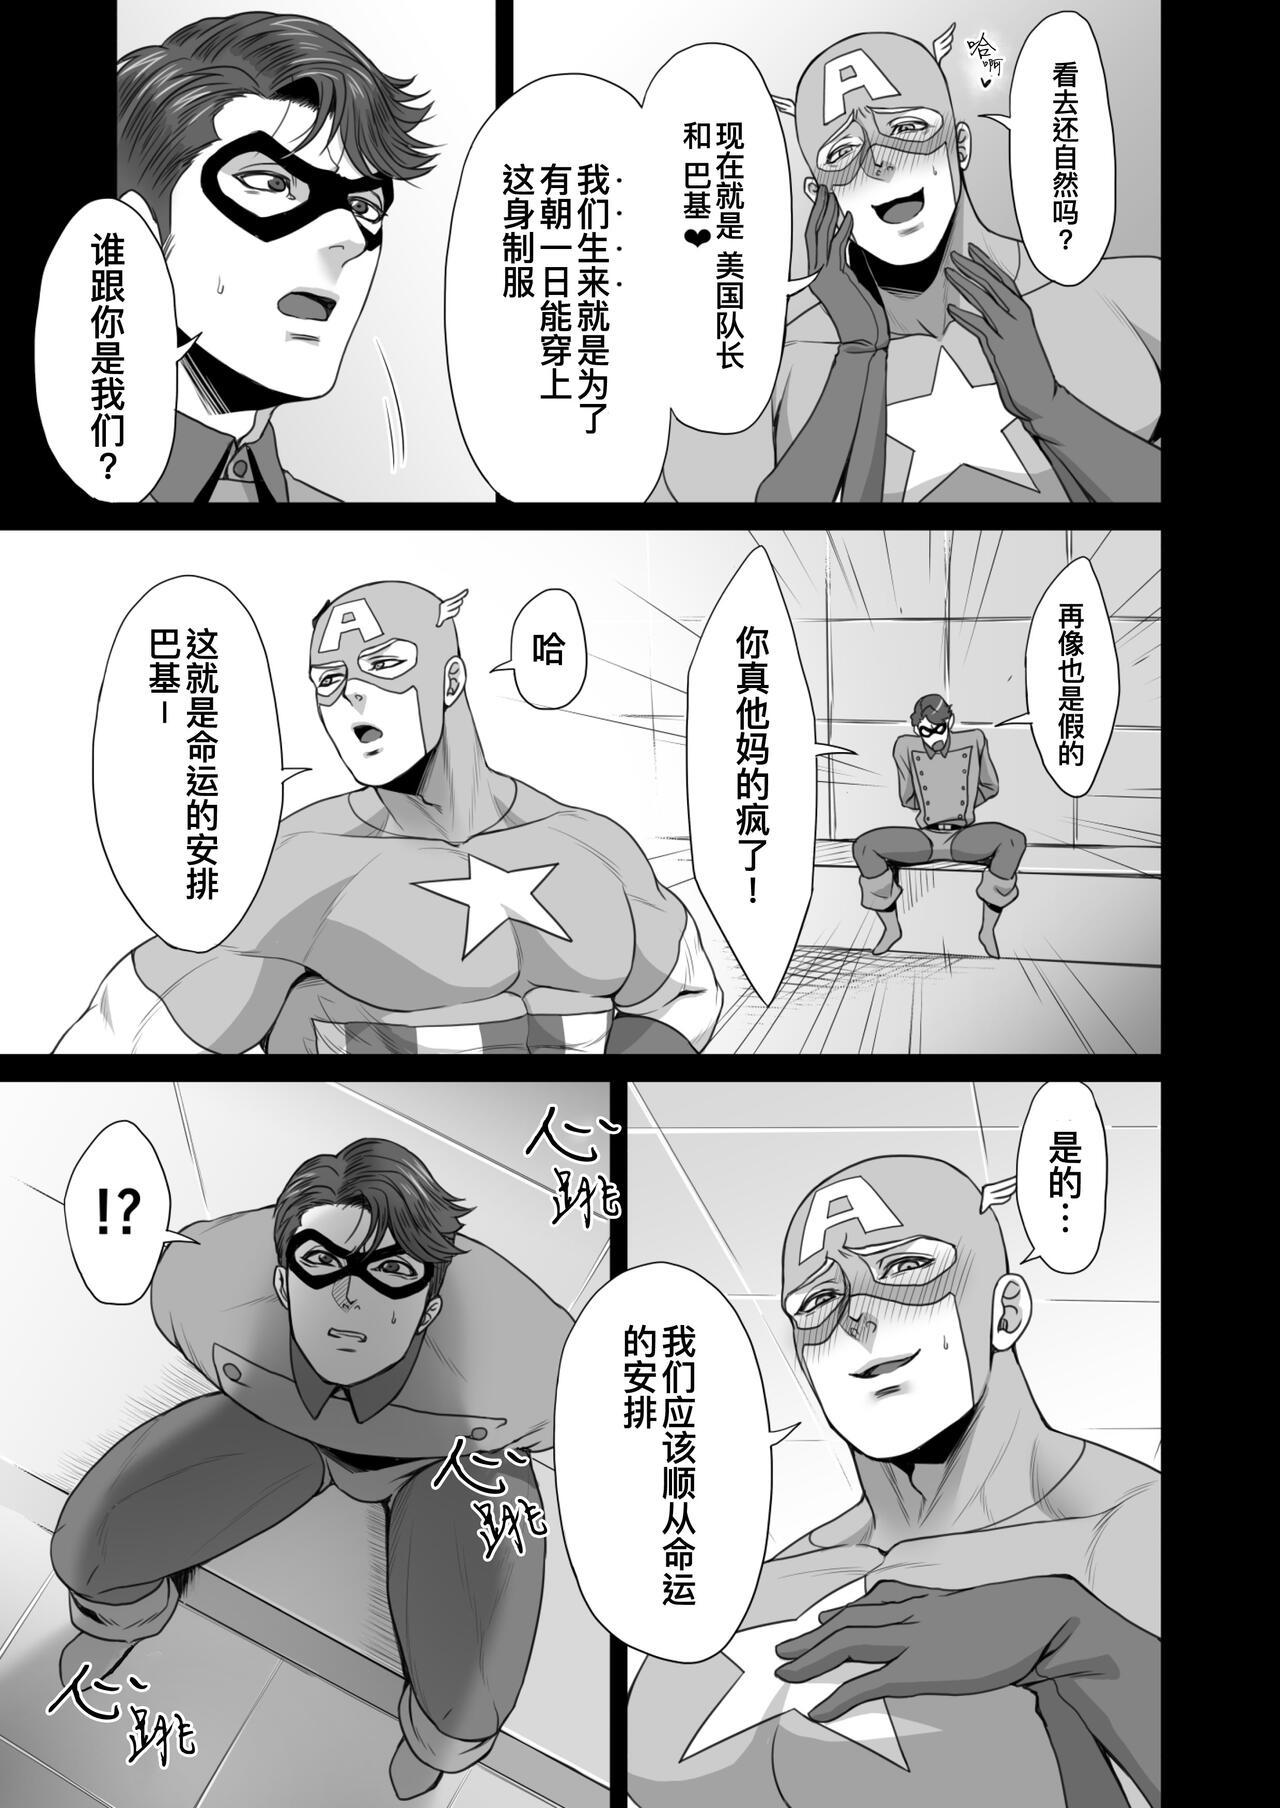 Watersports NO HEROES Our love and hate relationship | 不再需要英雄 - 关于我们之间的爱恨情仇 - Avengers Machine - Page 7